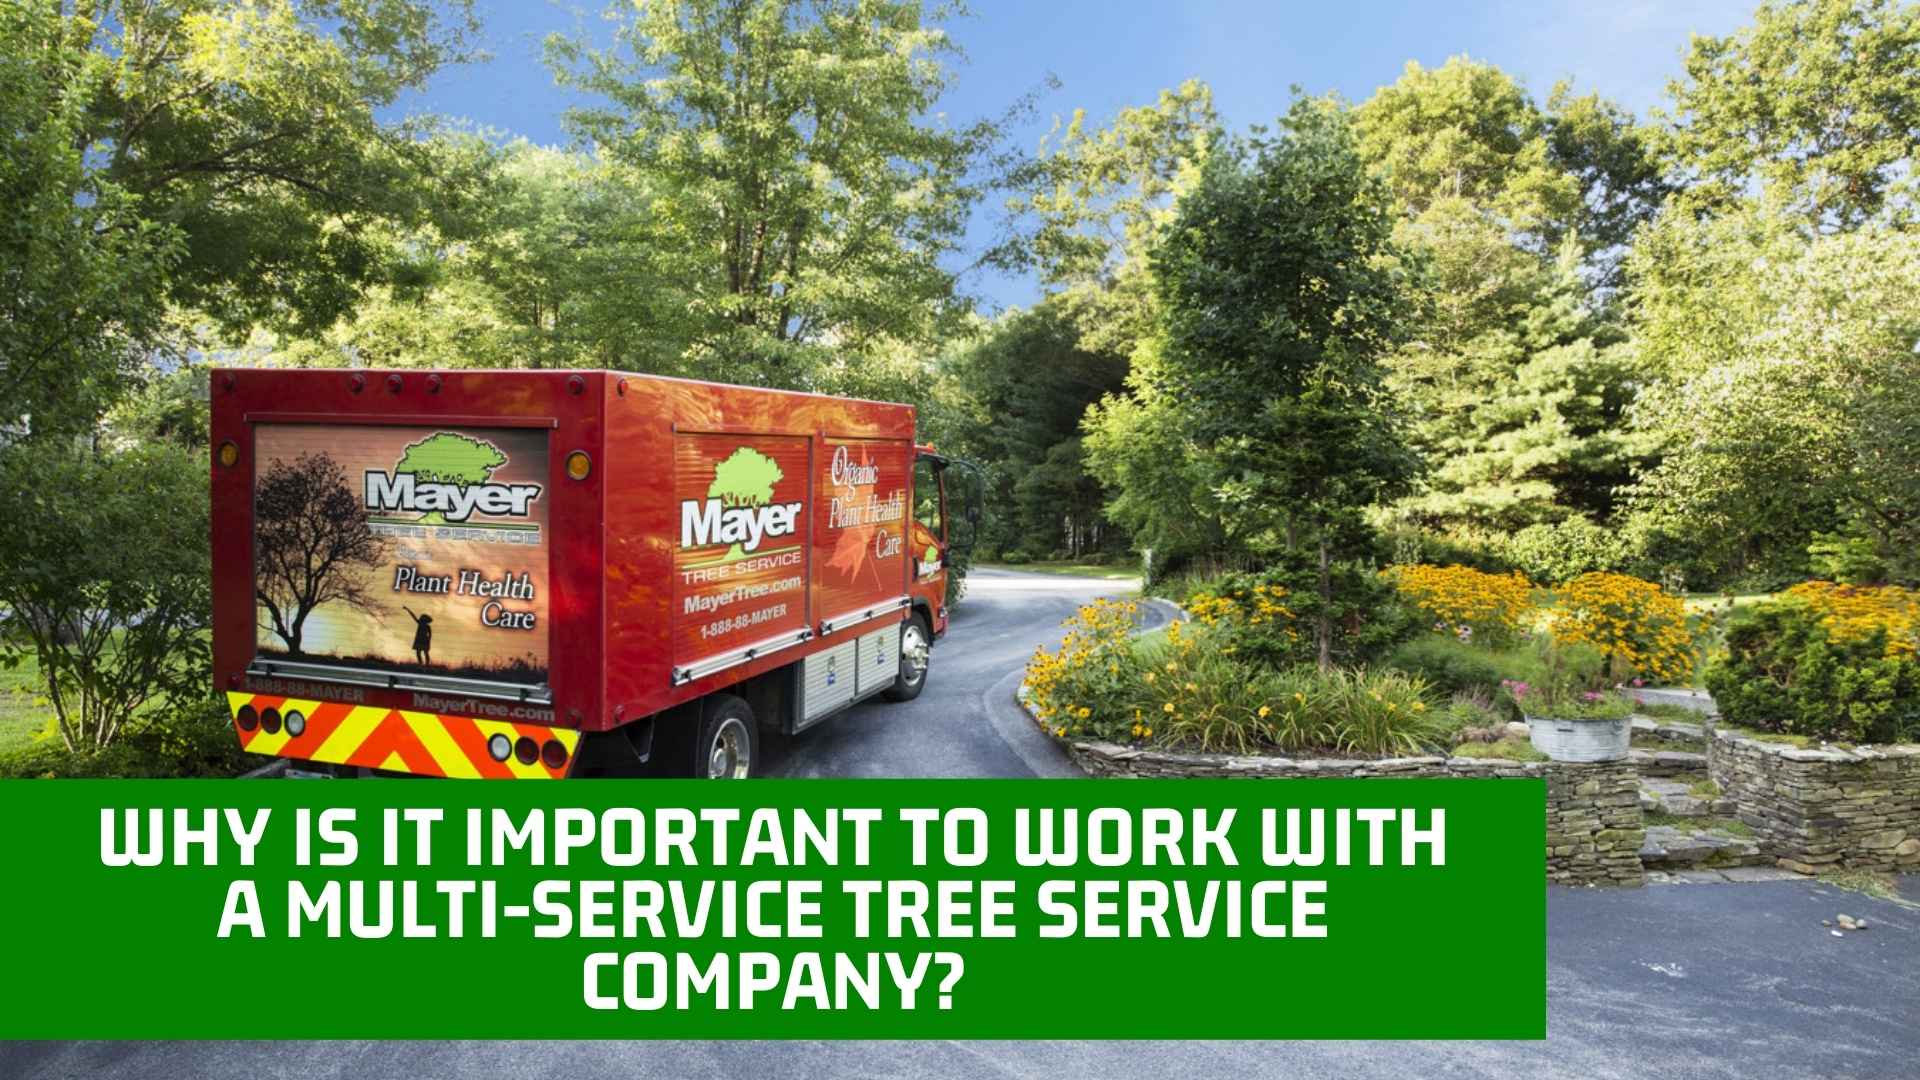 Why Is It Important to Work with a Multi-Service Tree Service Company